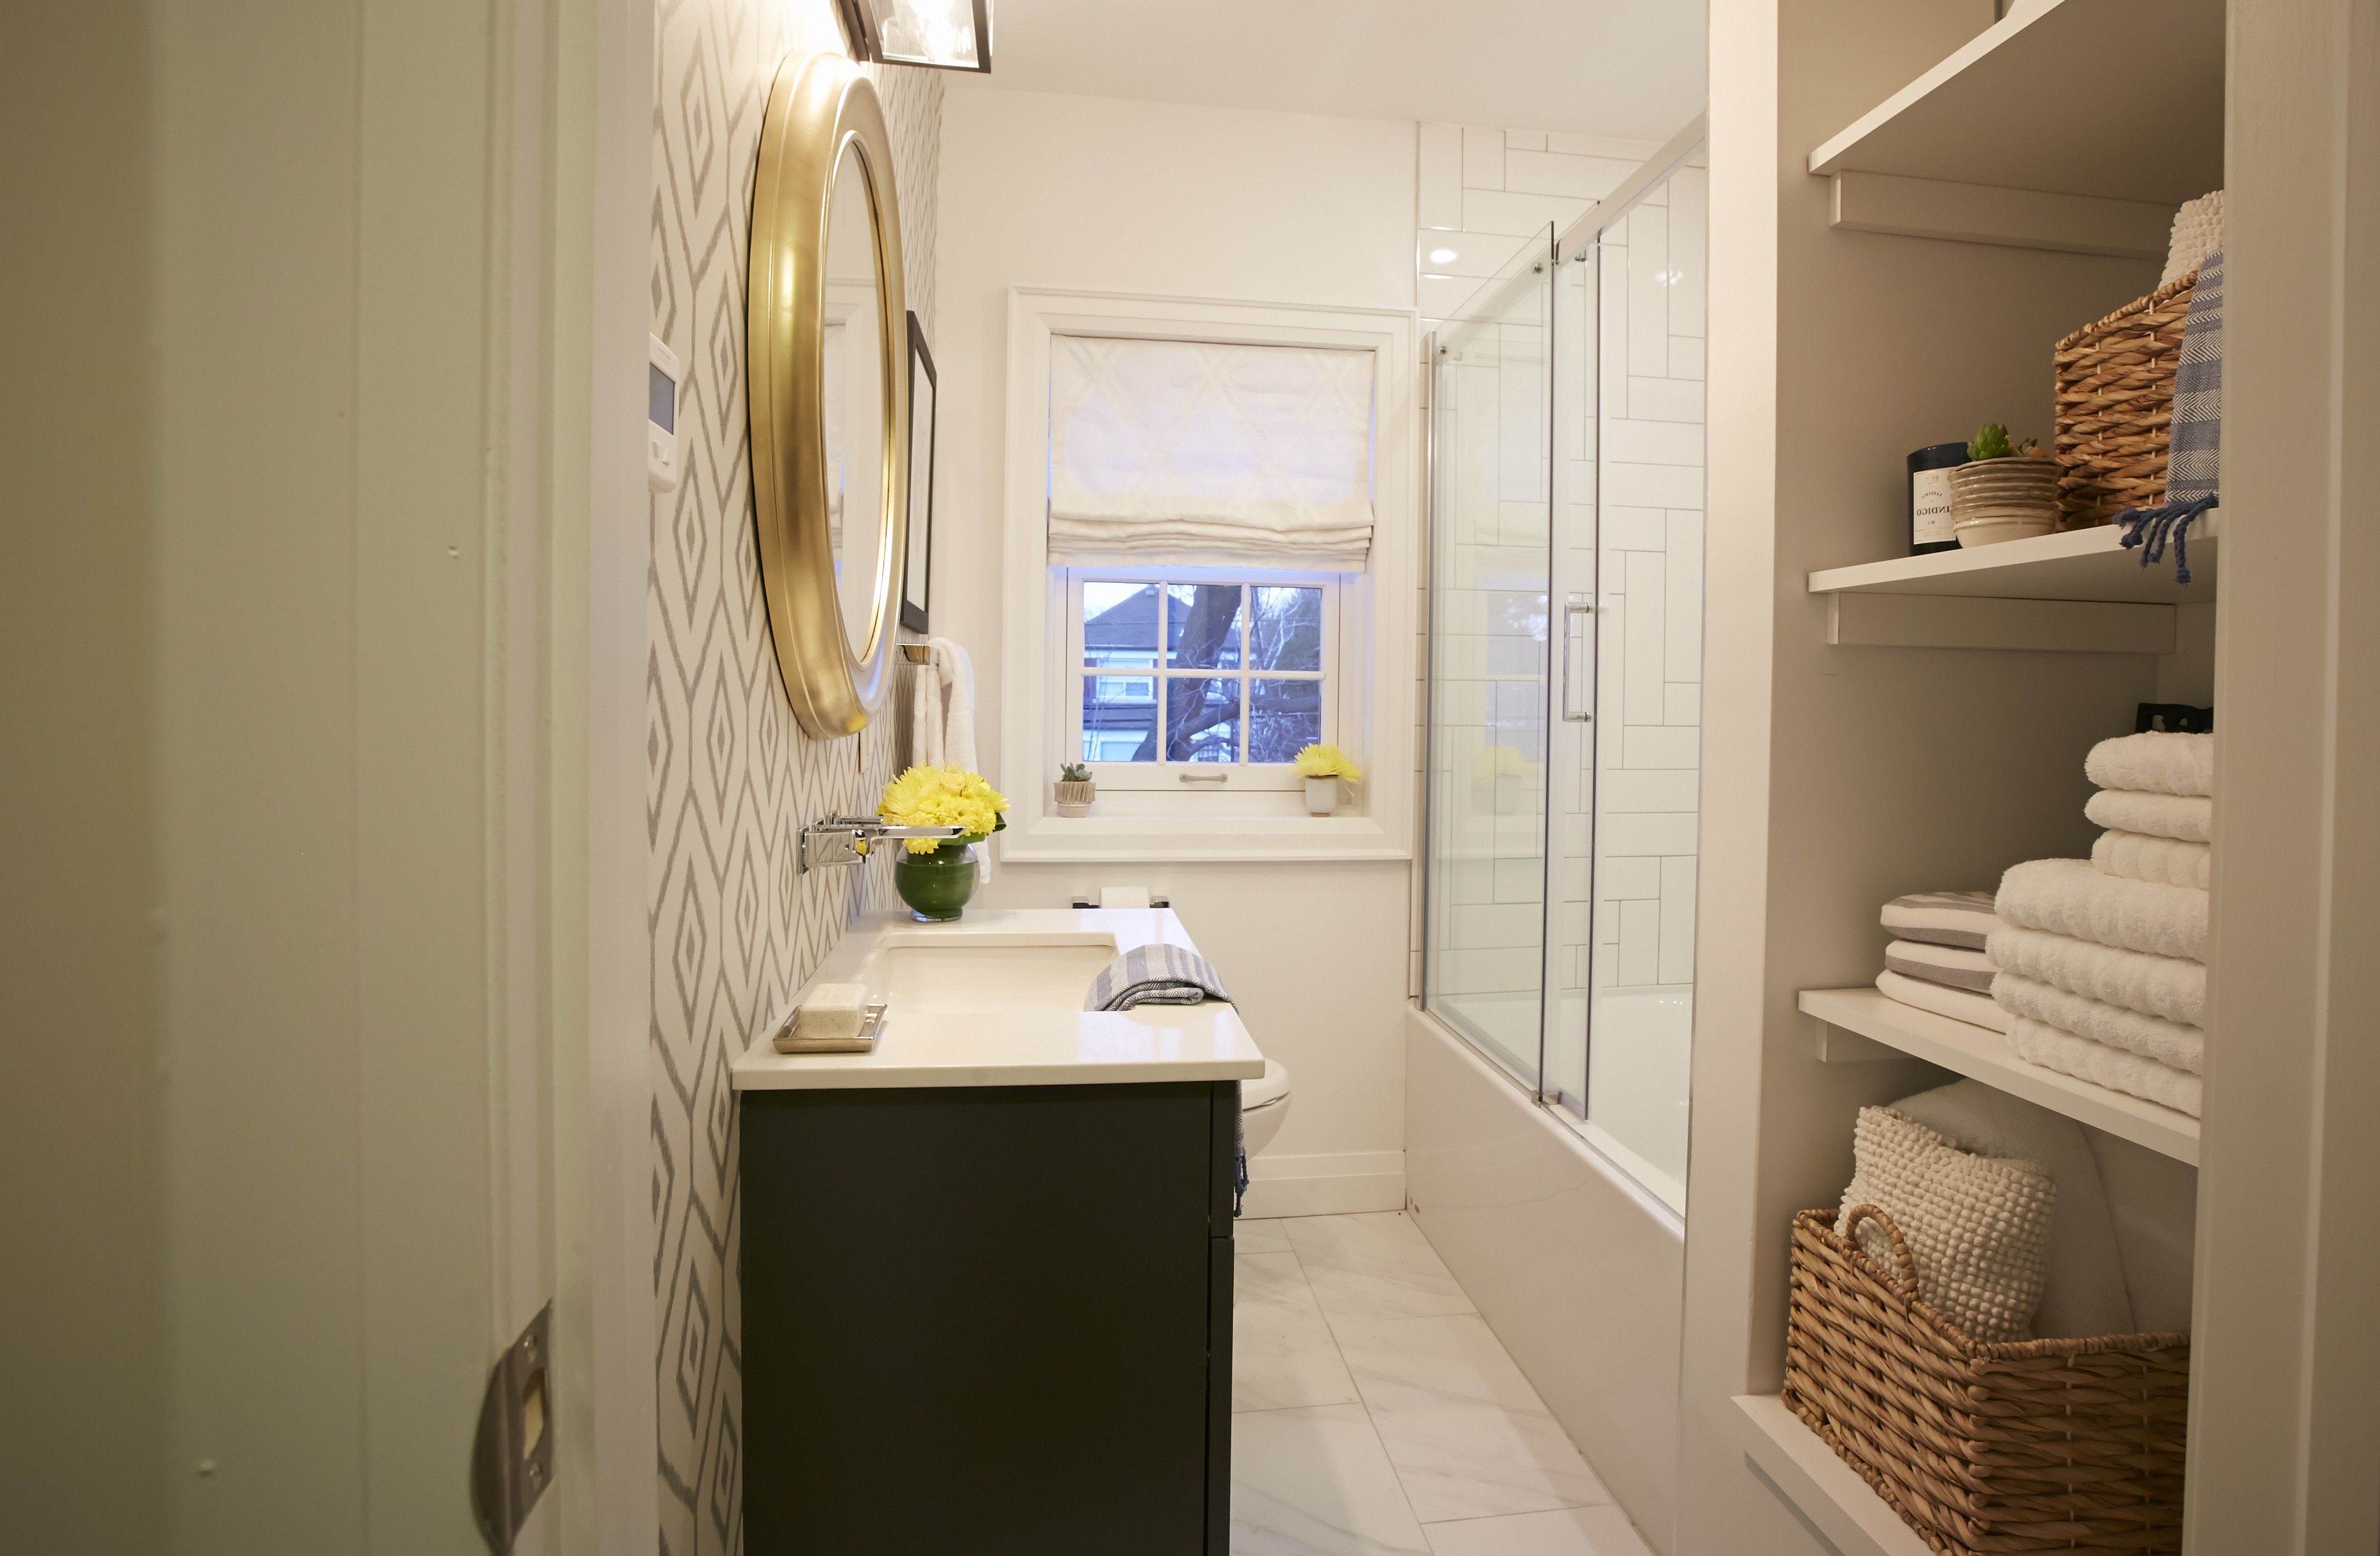 Narrow Bathroom With Built In Open Shelving And Sliding Glass Door Shower (View 3 of 4)